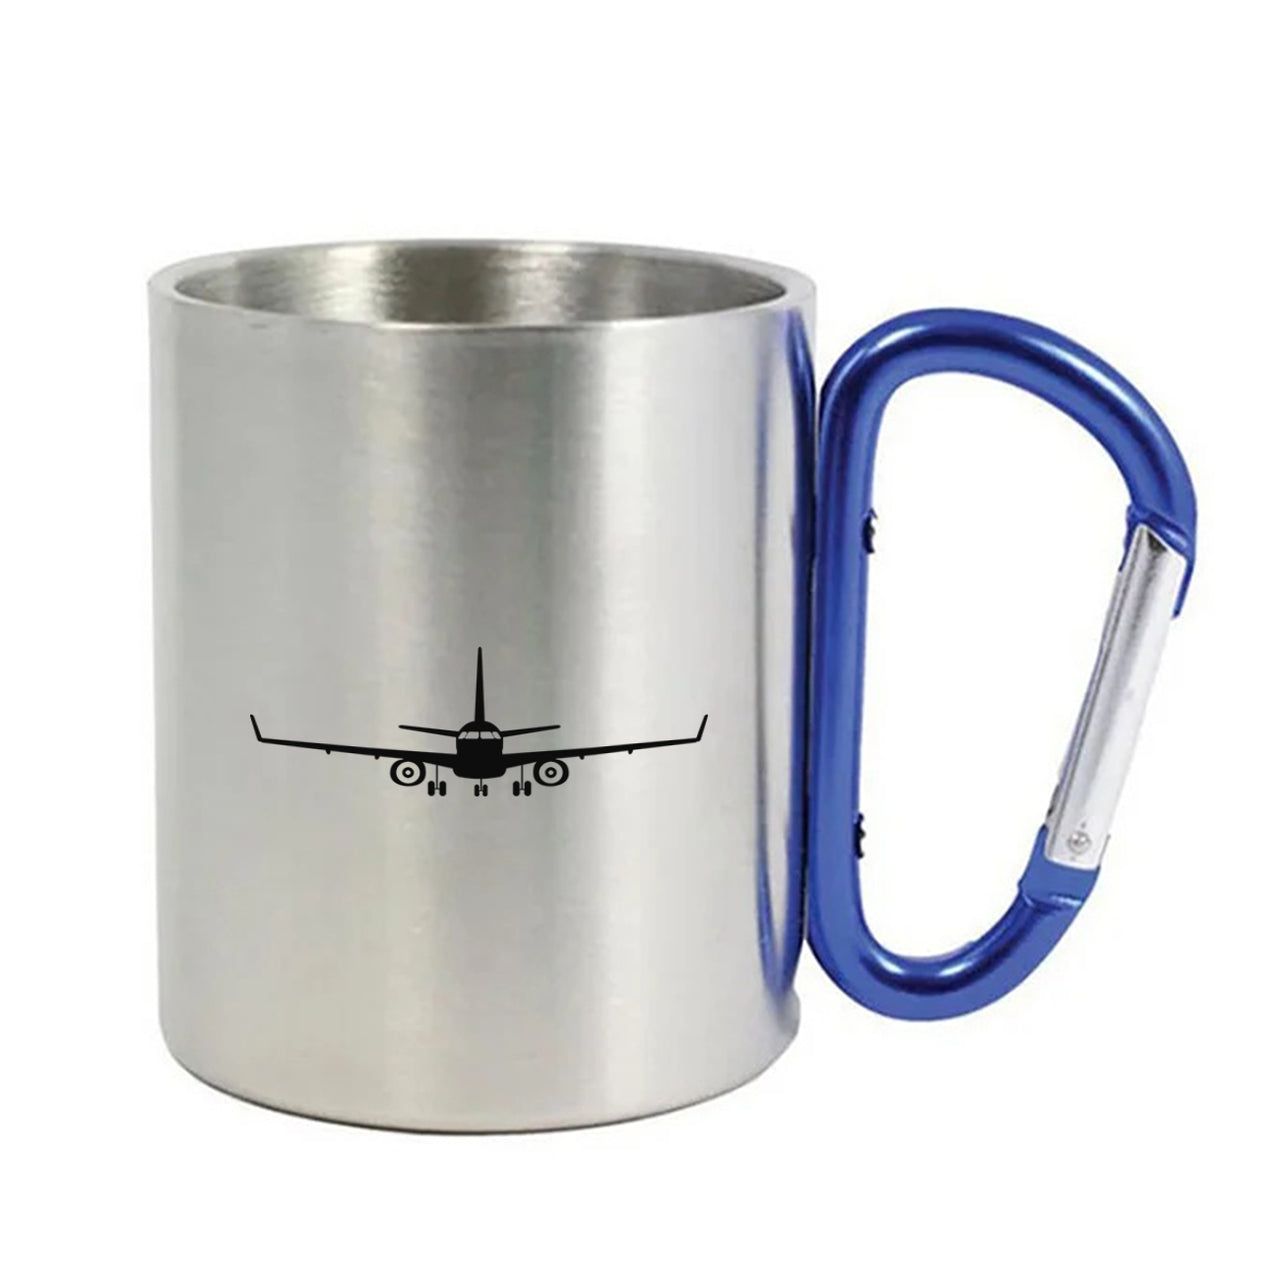 Embraer E-190 Silhouette Plane Designed Stainless Steel Outdoors Mugs